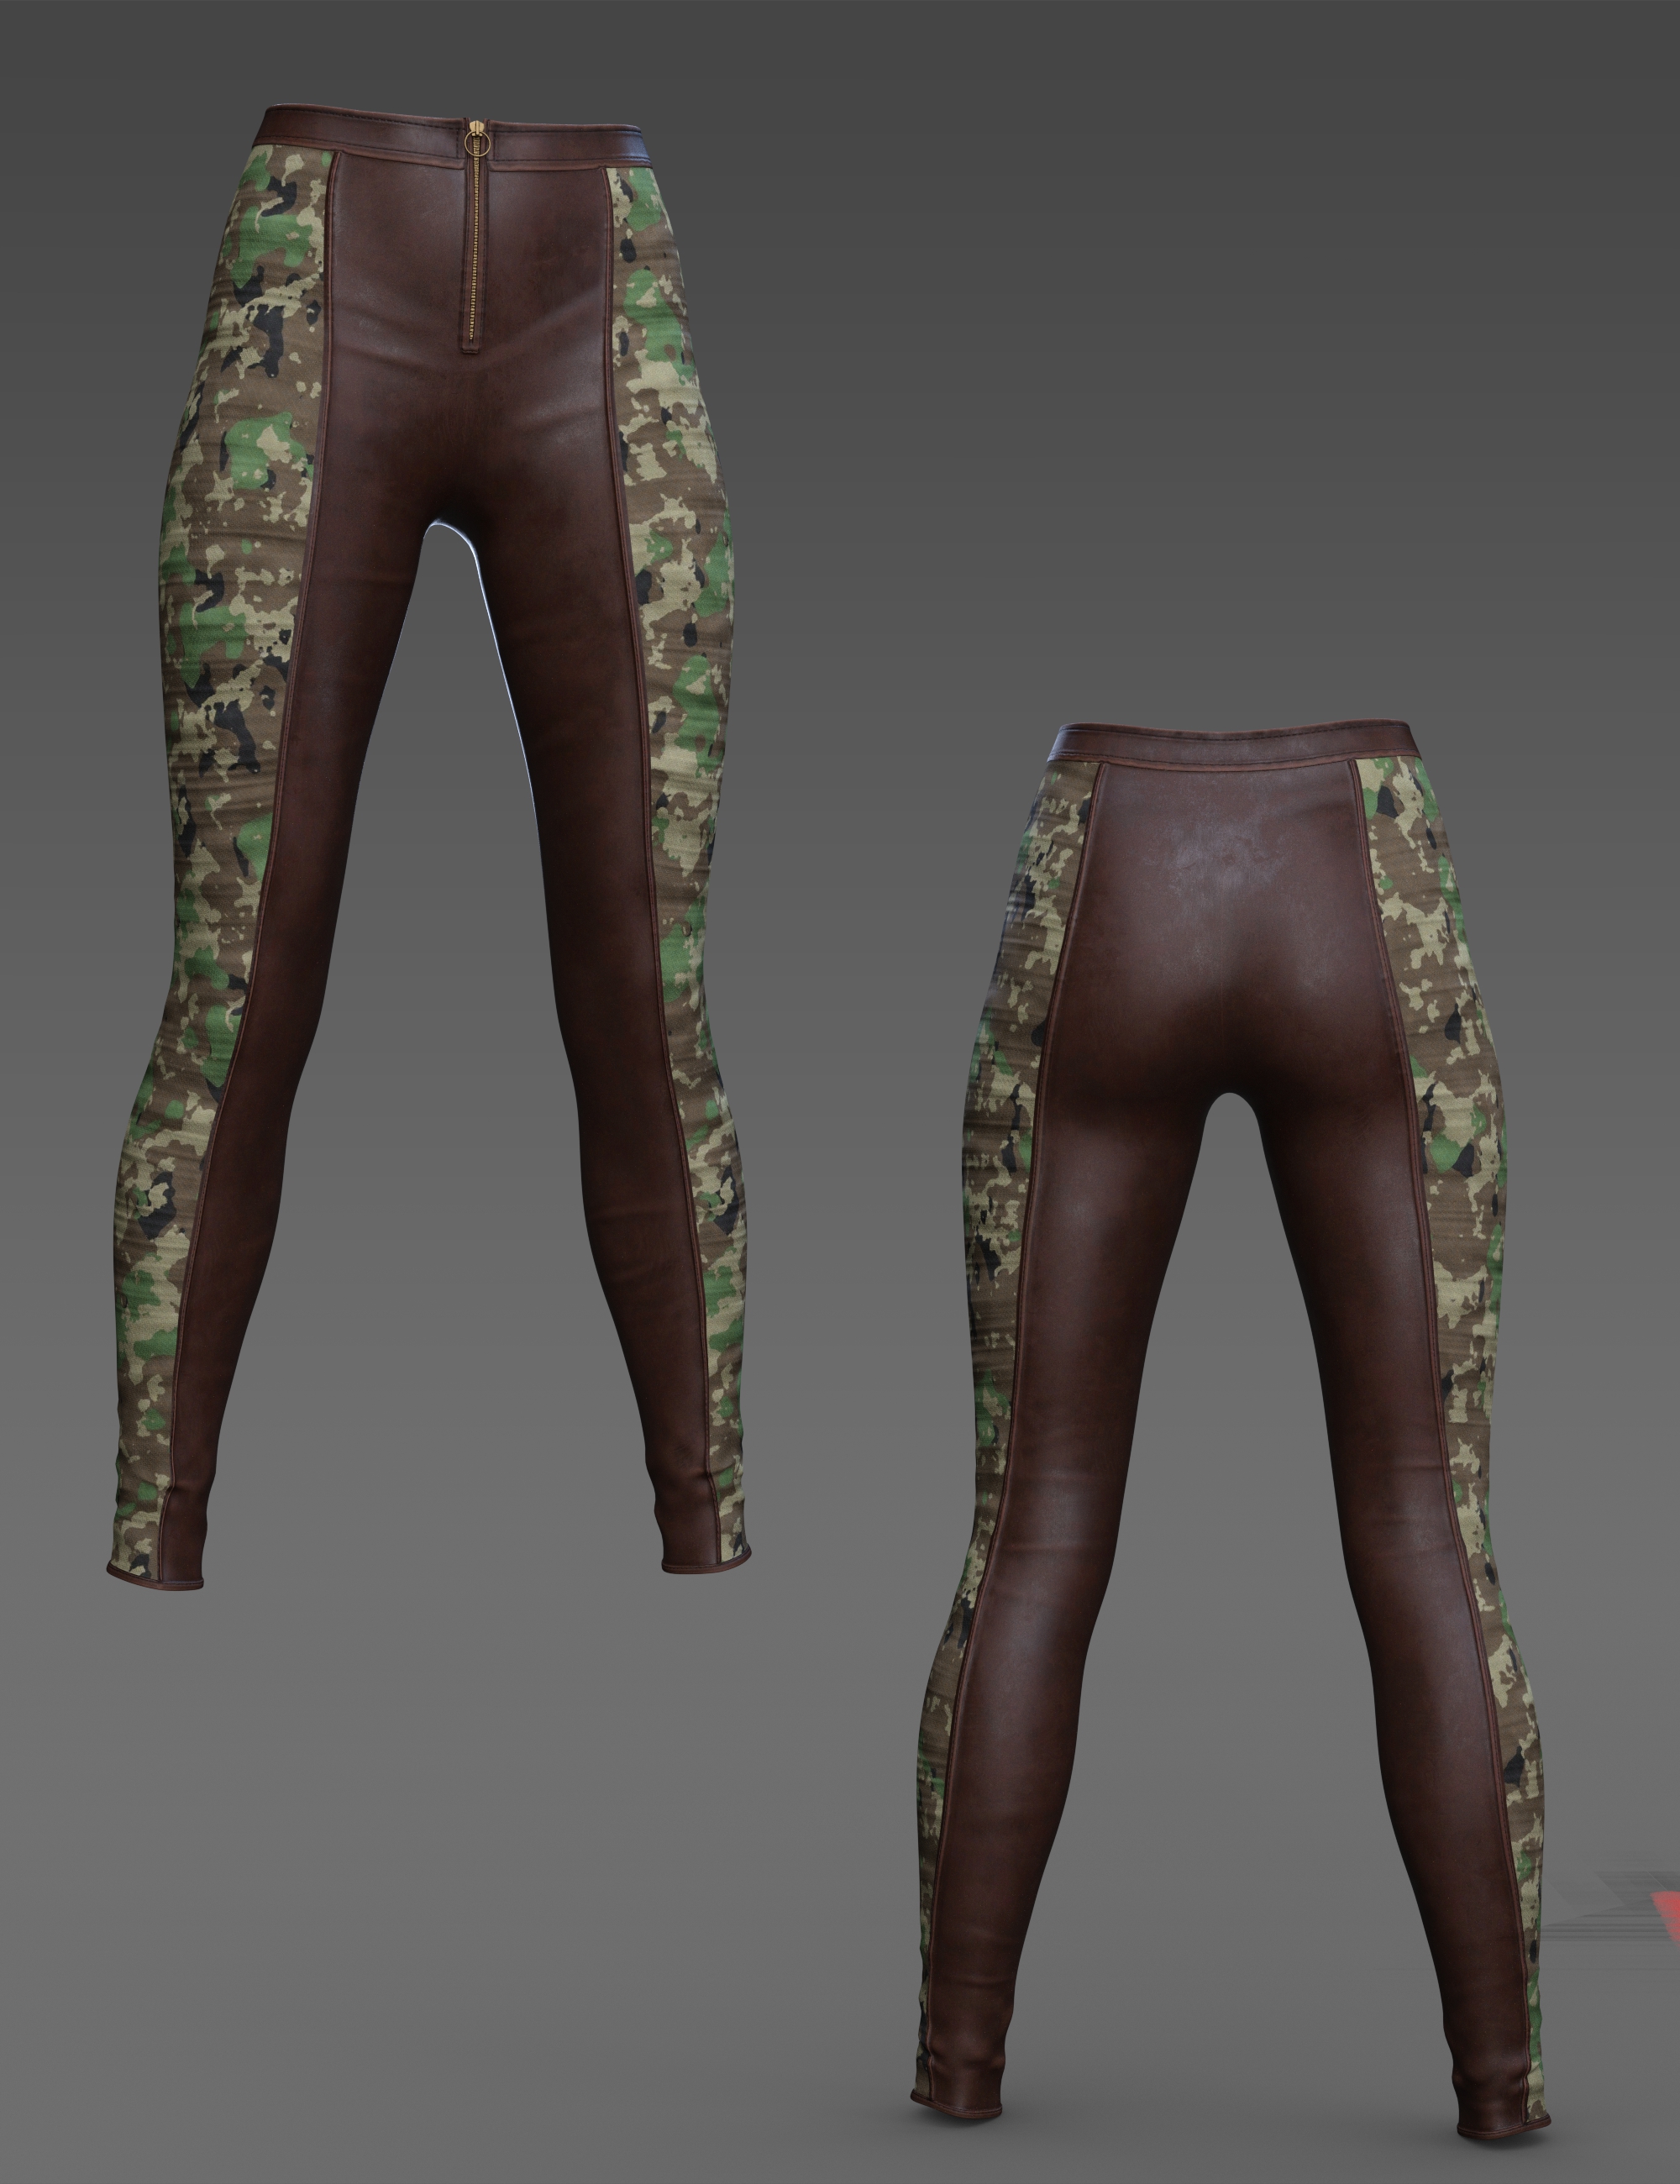 Black Mamba Pants for Genesis 8 and 8.1 Females by: Nikisatez, 3D Models by Daz 3D